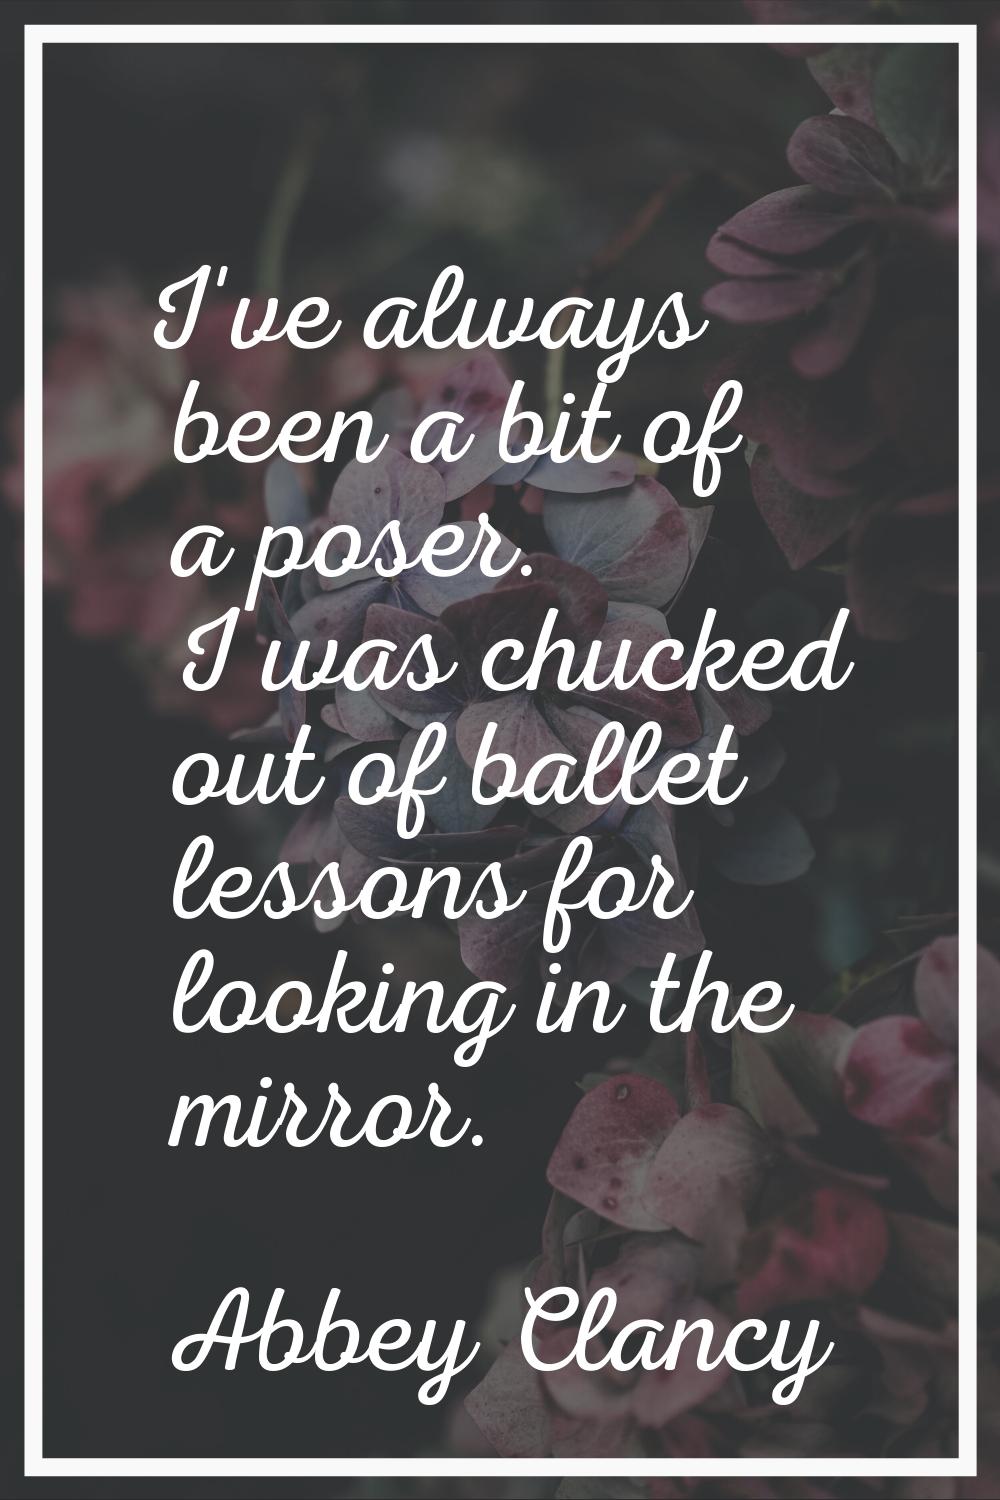 I've always been a bit of a poser. I was chucked out of ballet lessons for looking in the mirror.